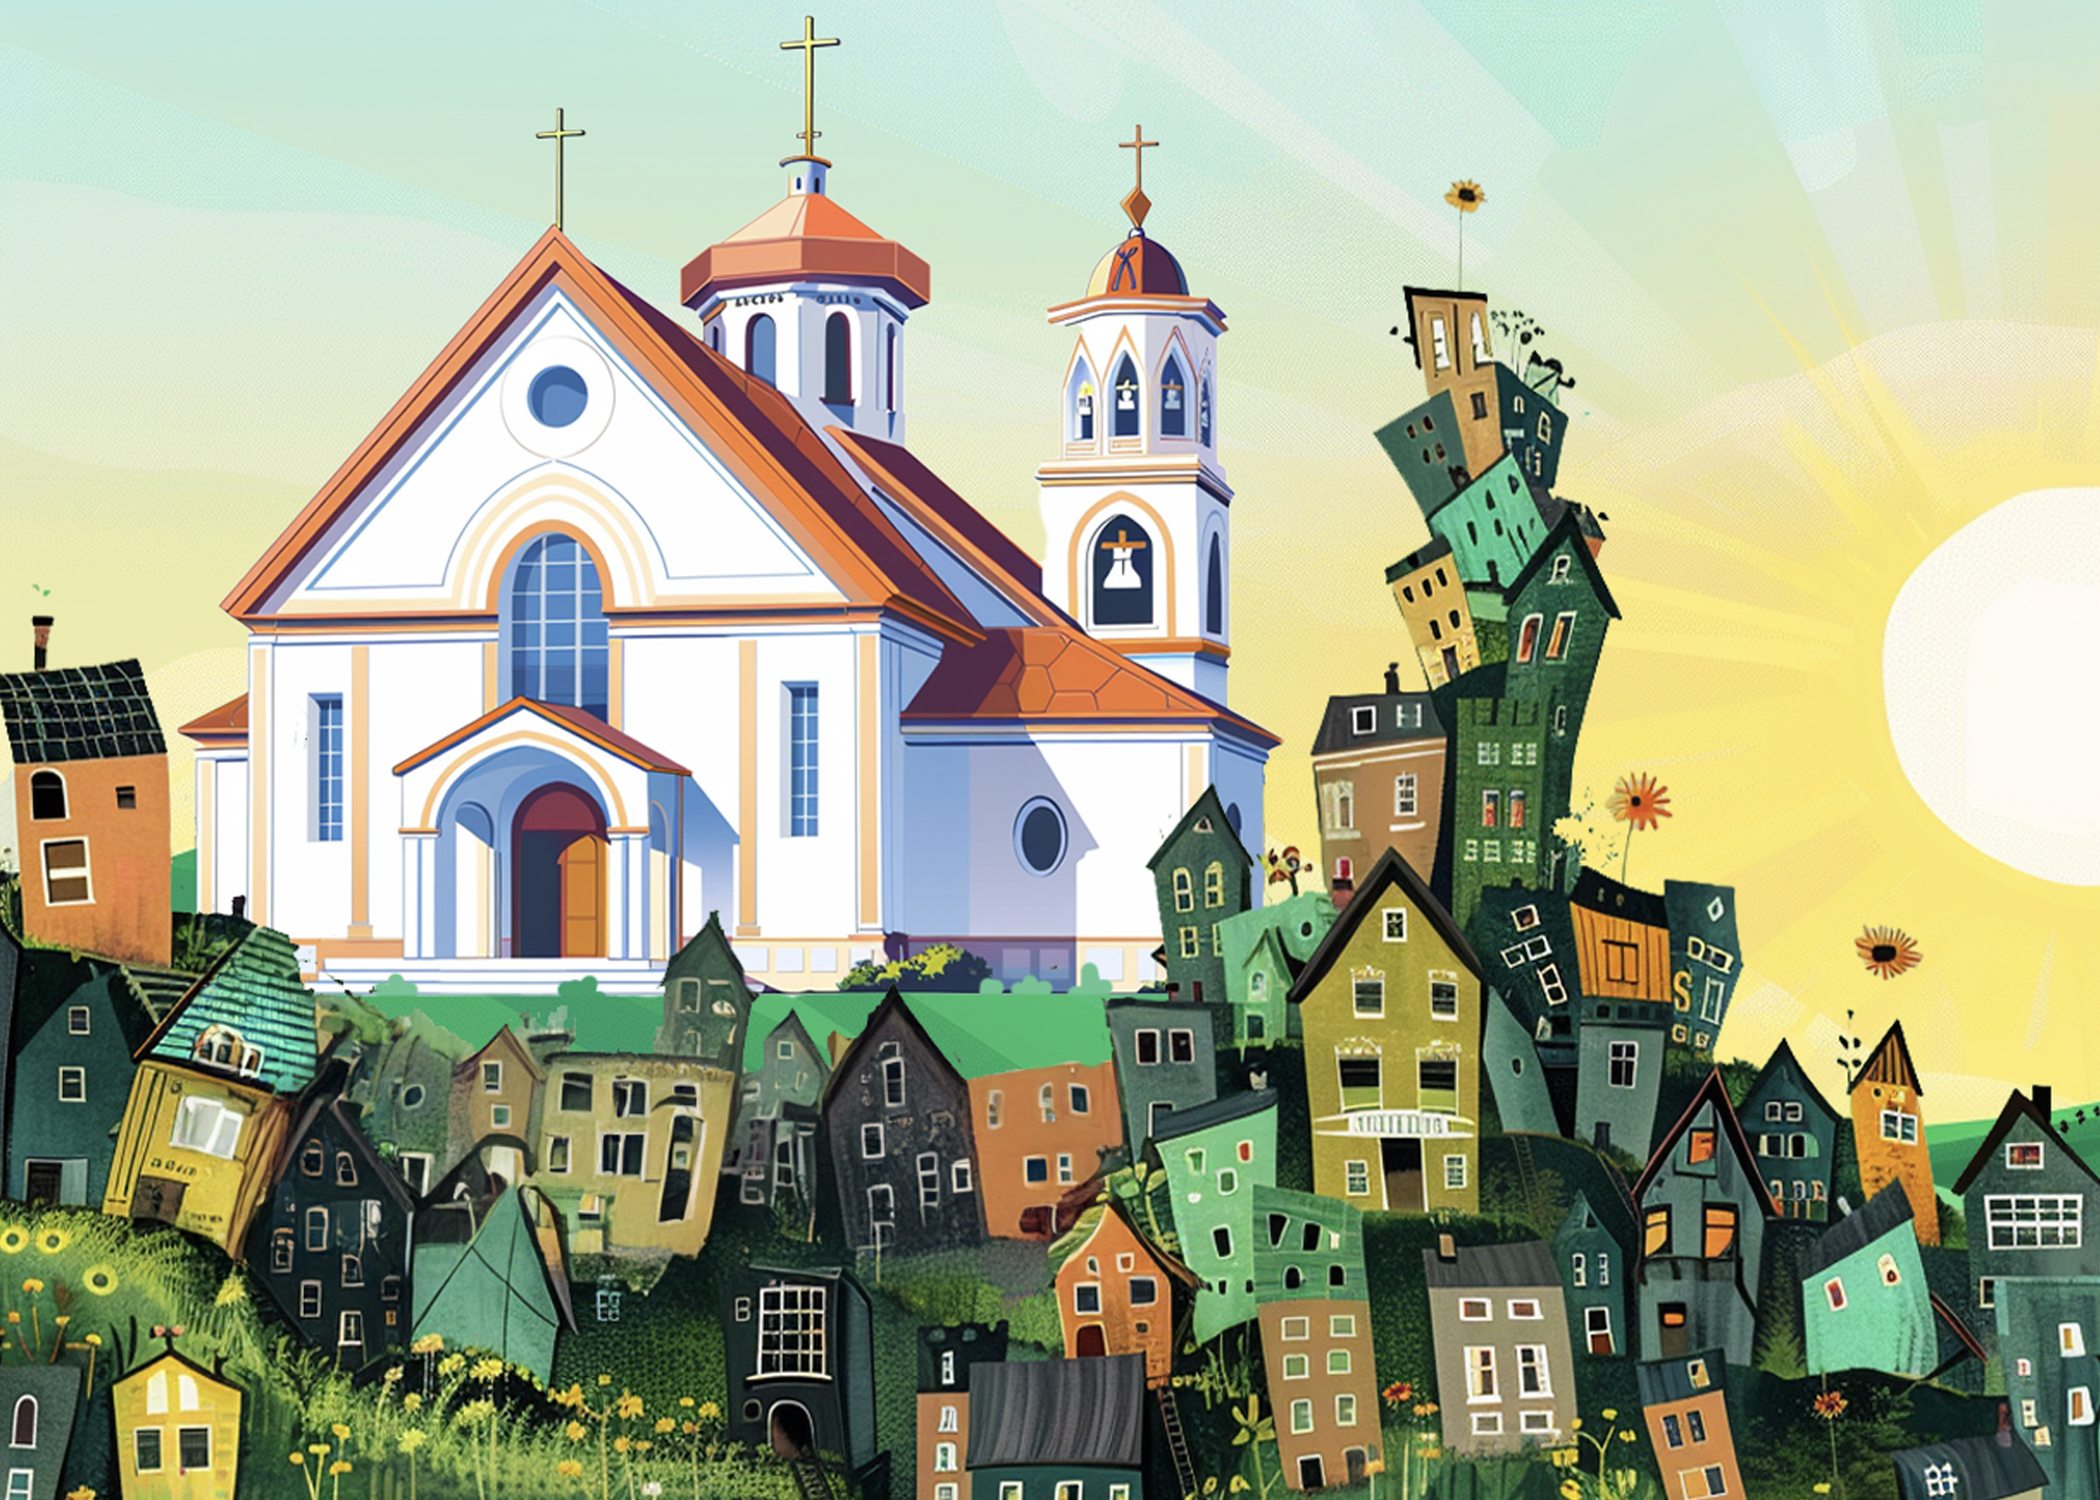 A white church with orange roofs stands on a hill, surrounded by sunflowers and whimsical, tilting houses. The sun shines brightly in a greenish-yellow sky.